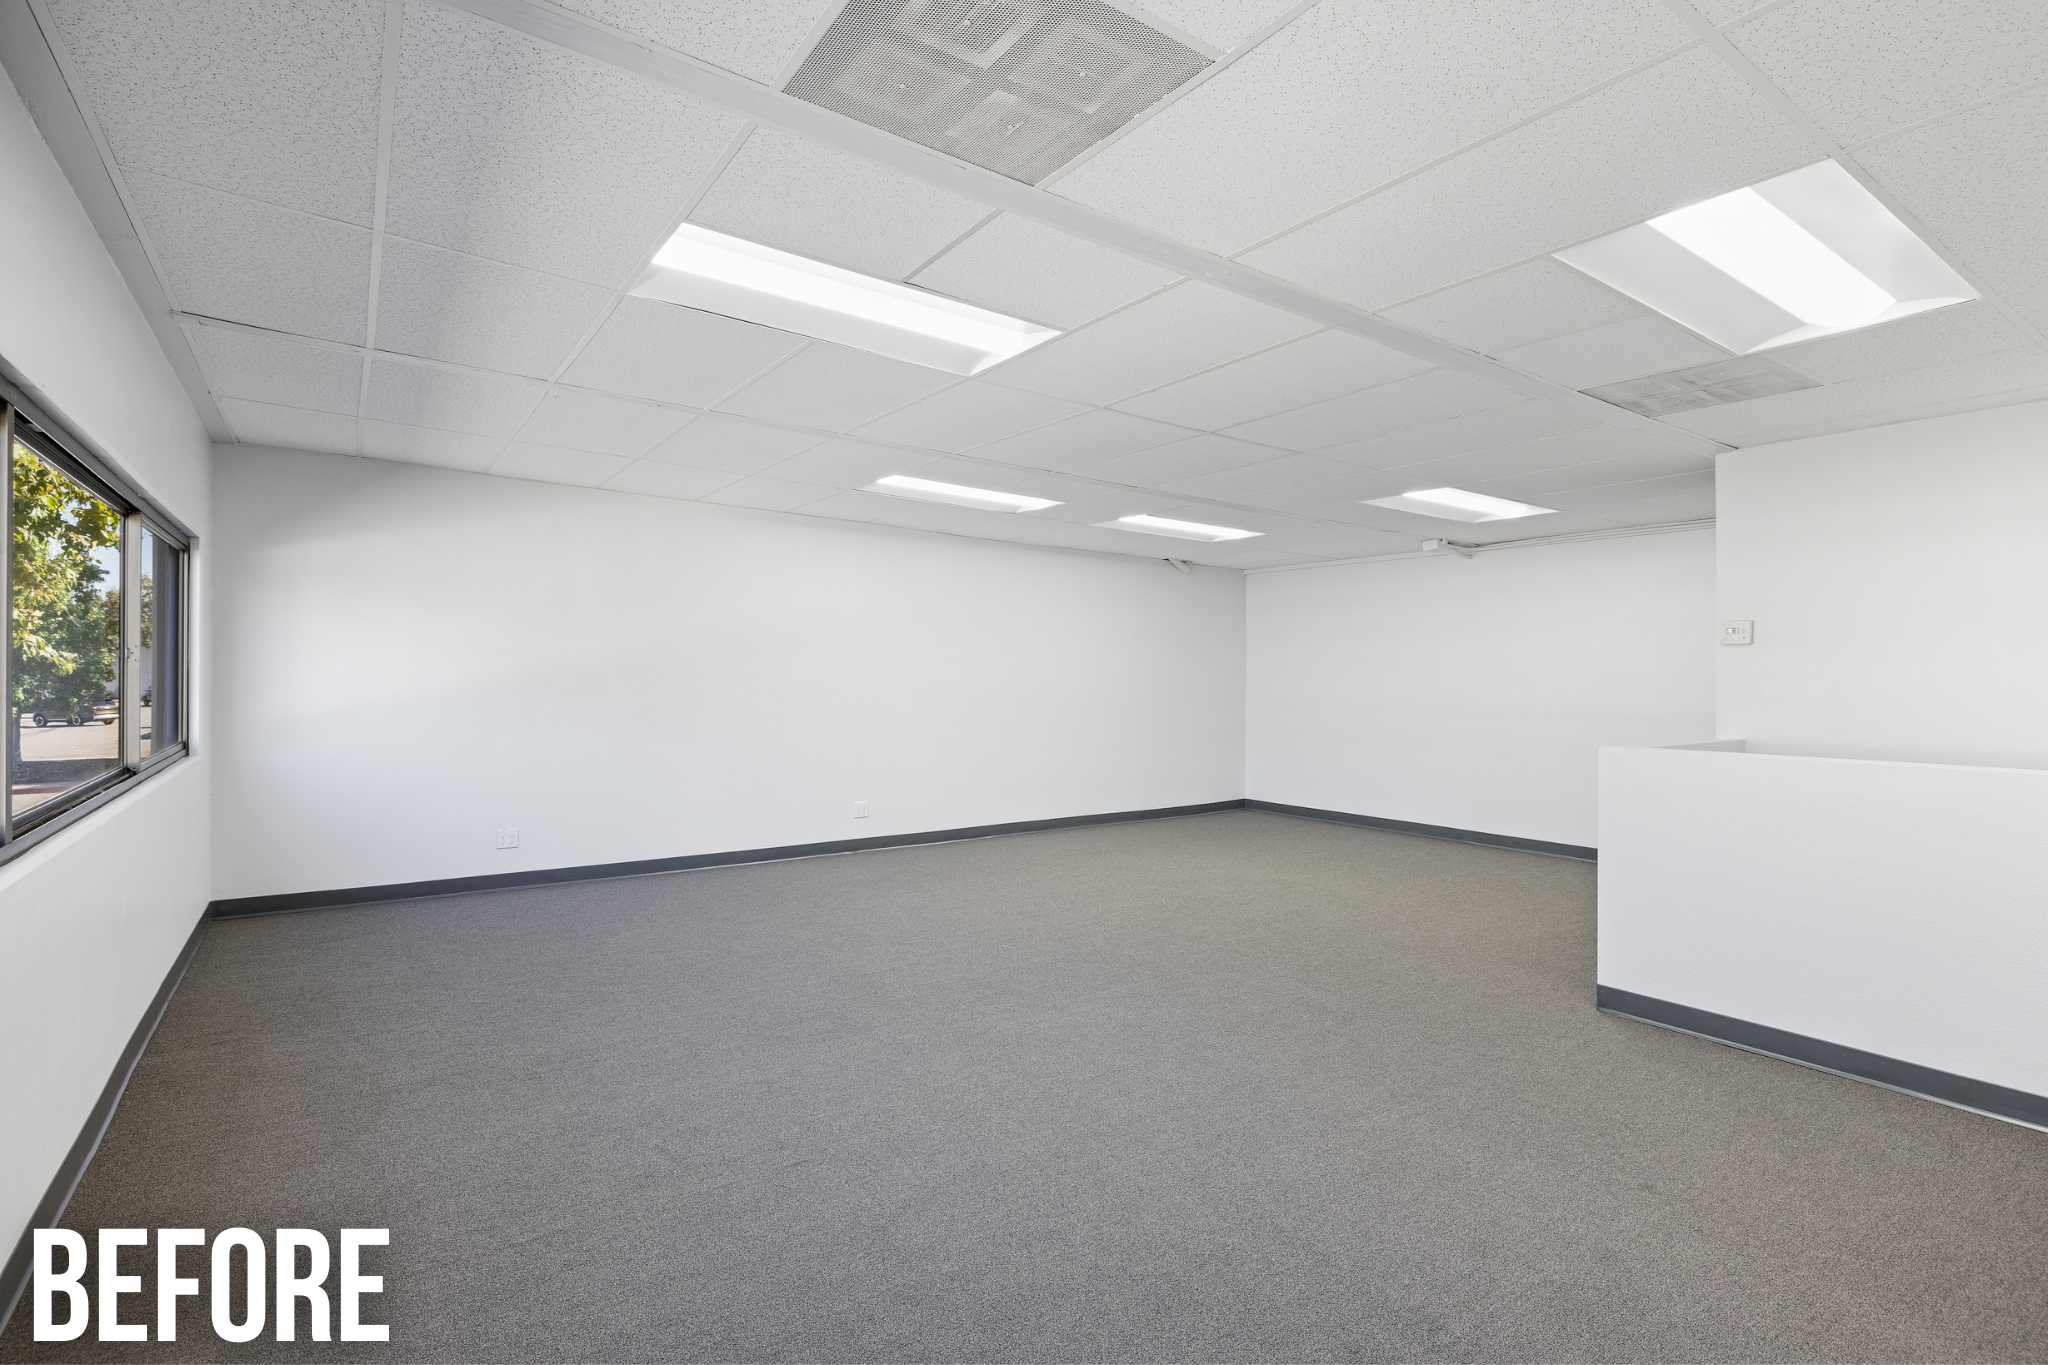 Square Foot Productions Virtual Remodel - real estate photo editing, before image of an empty office room